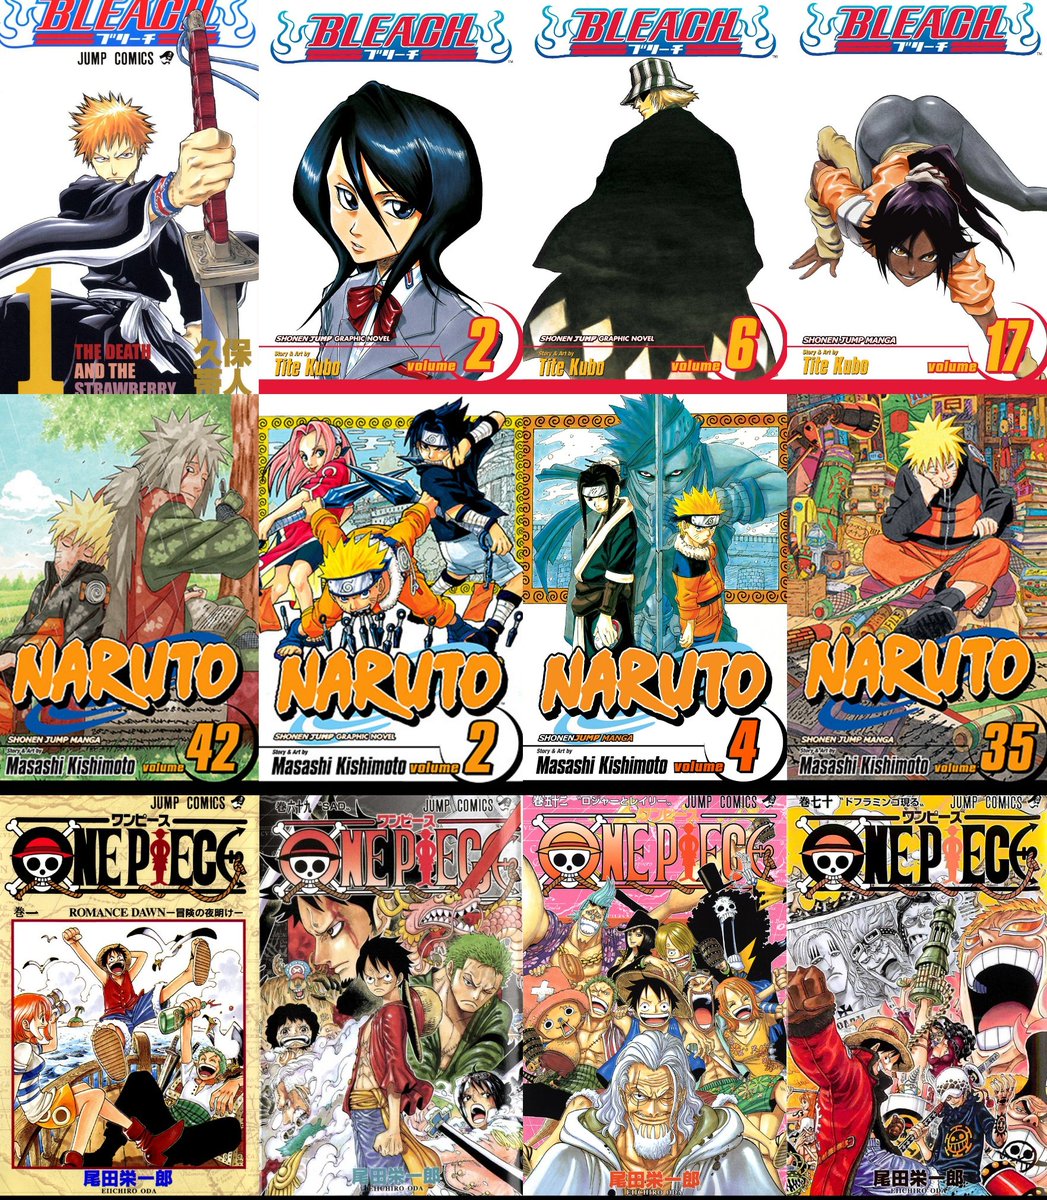 Seinenjump Who Has The Best Manga Volume Covers Of The Big 3 Bleach Naruto Or One Piece